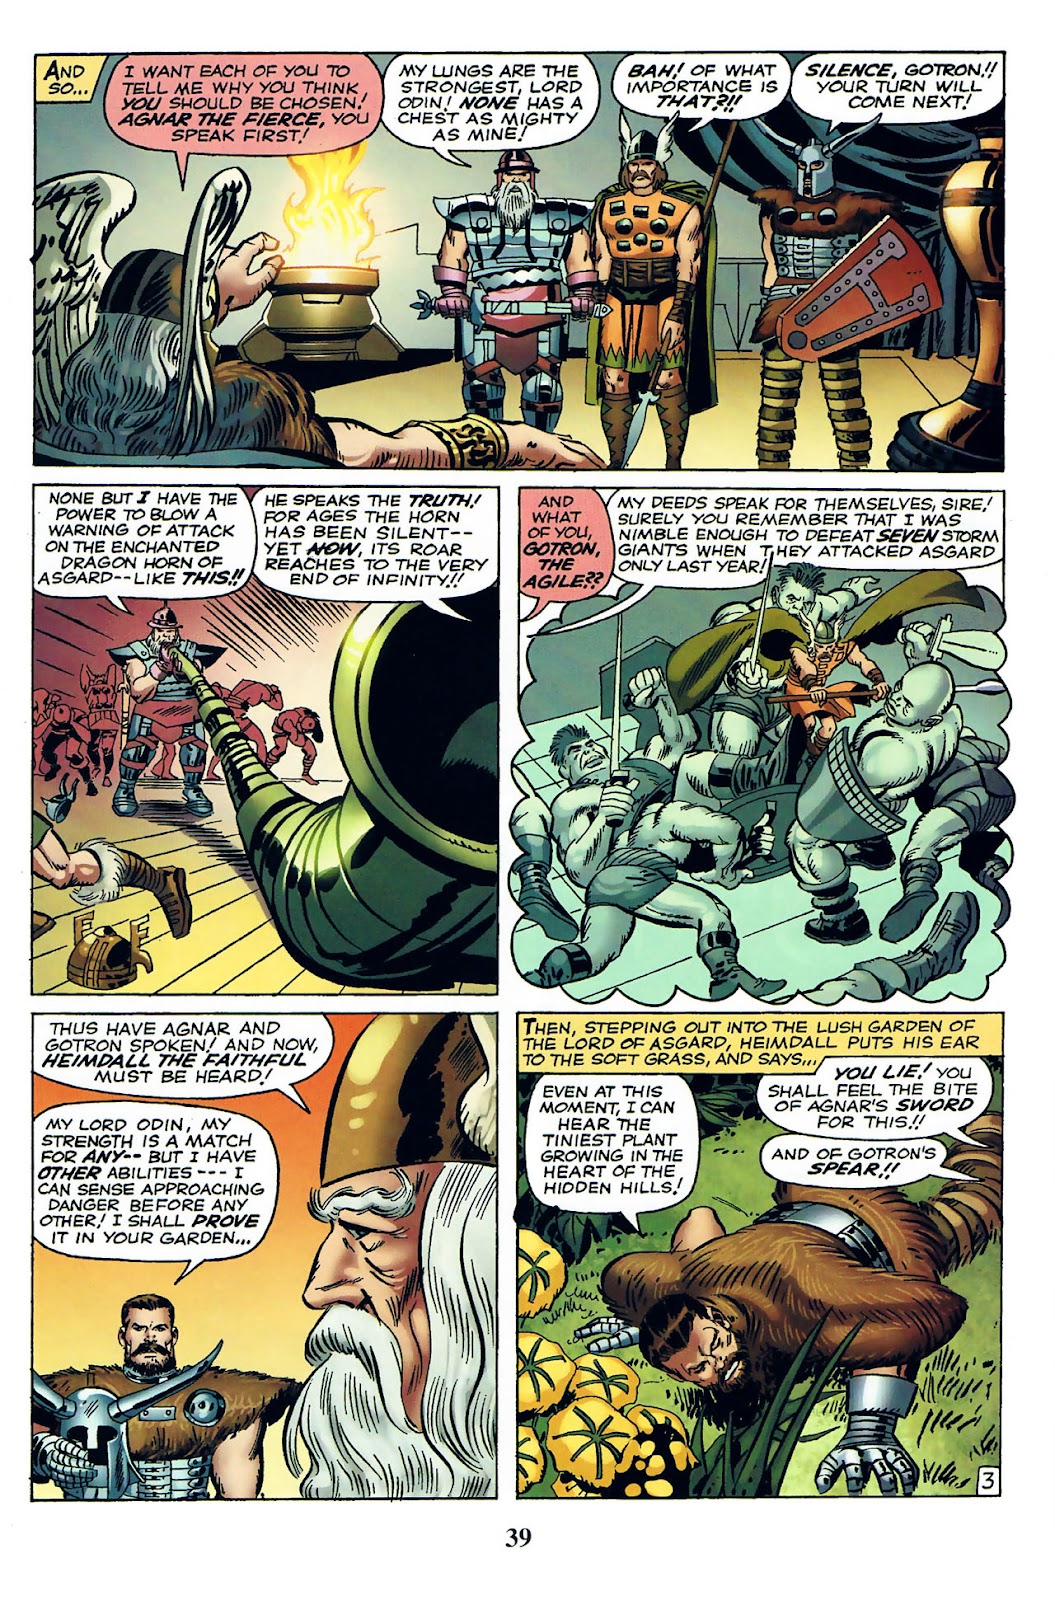 Thor: Tales of Asgard by Stan Lee & Jack Kirby issue 1 - Page 41